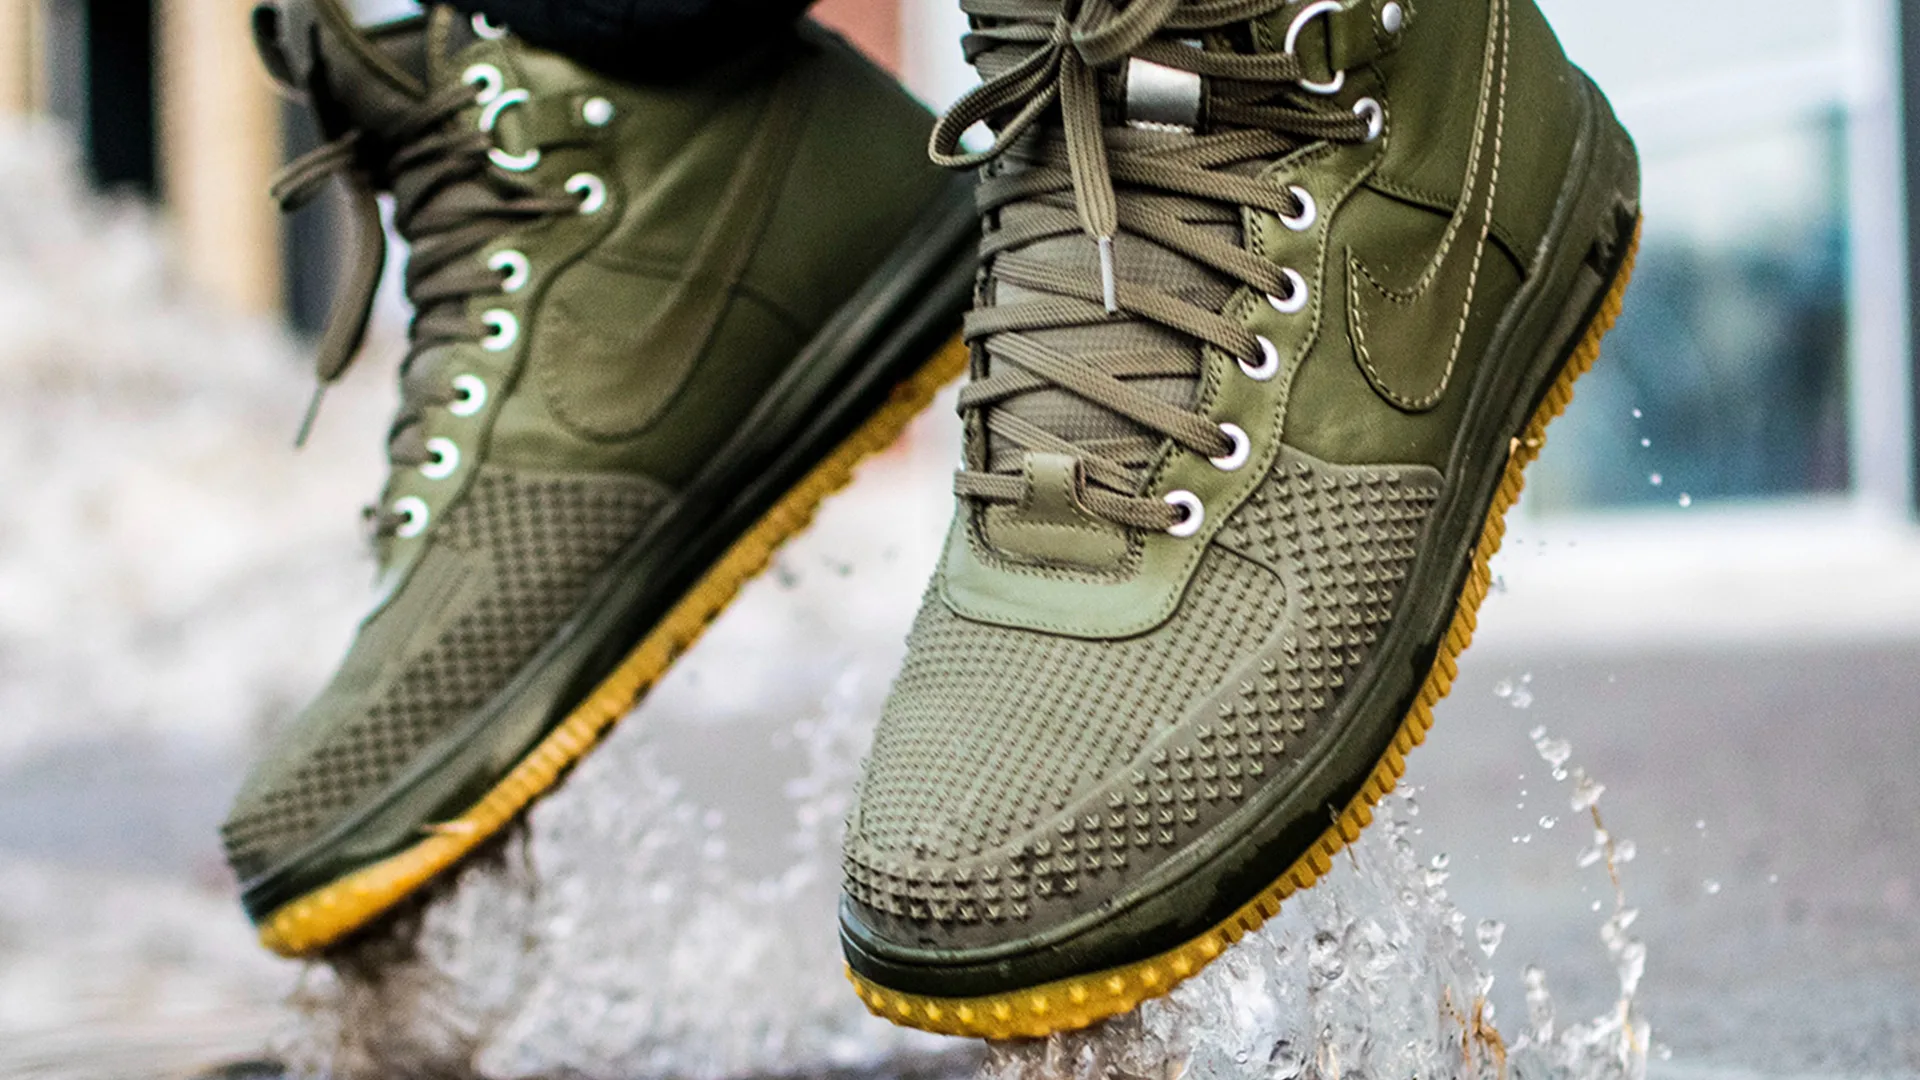 Green Nike hiking boots in a puddle